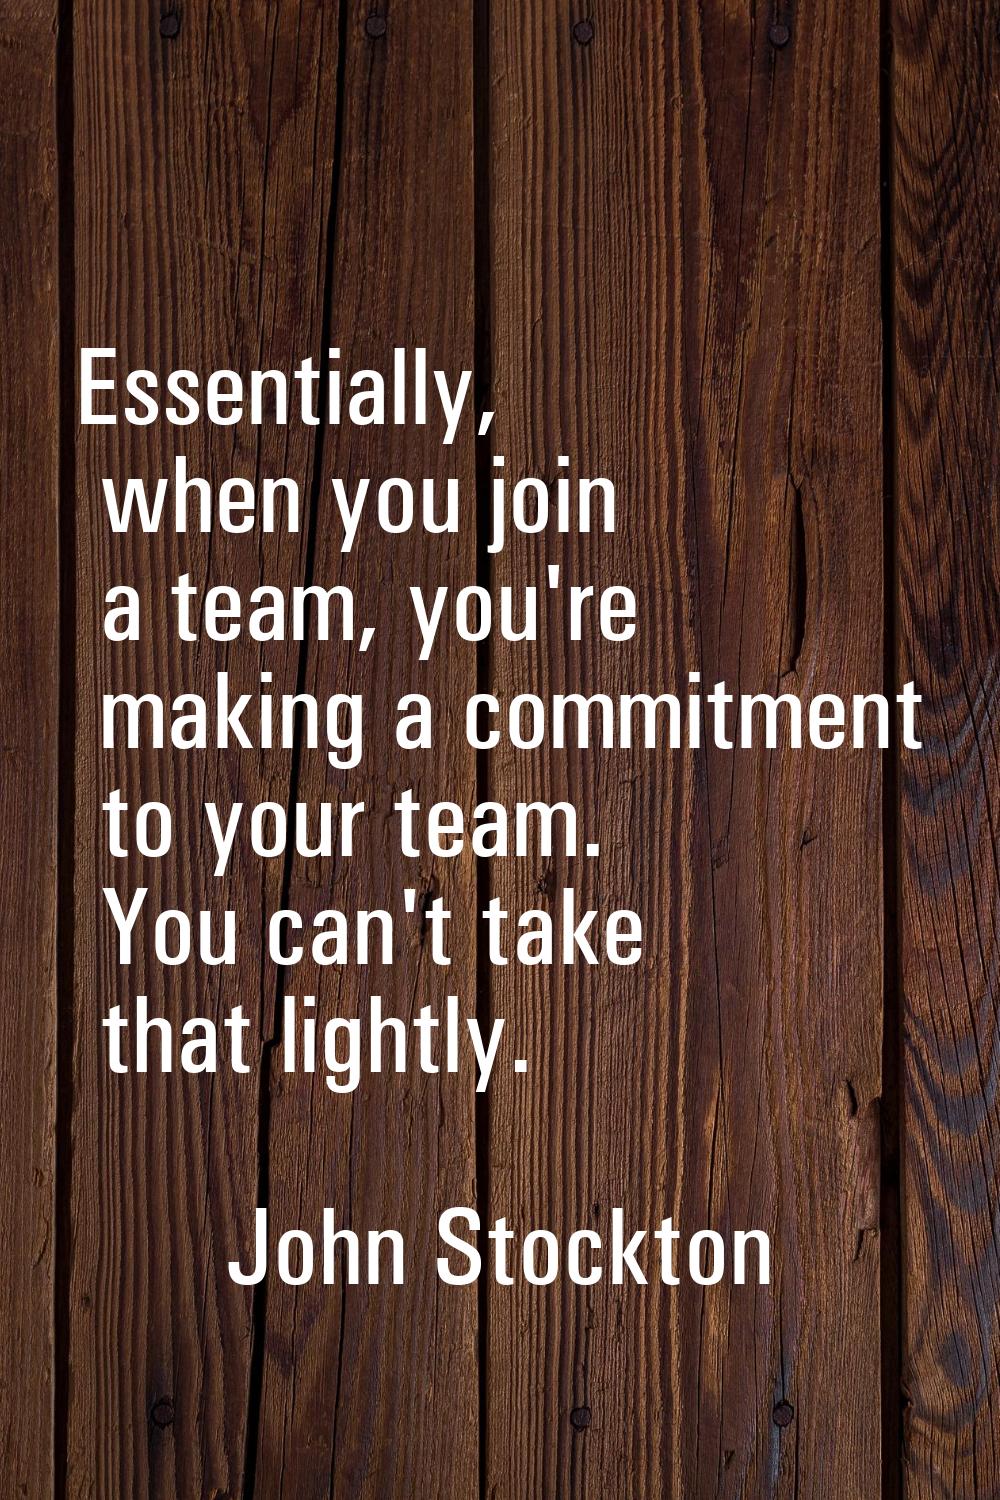 Essentially, when you join a team, you're making a commitment to your team. You can't take that lig